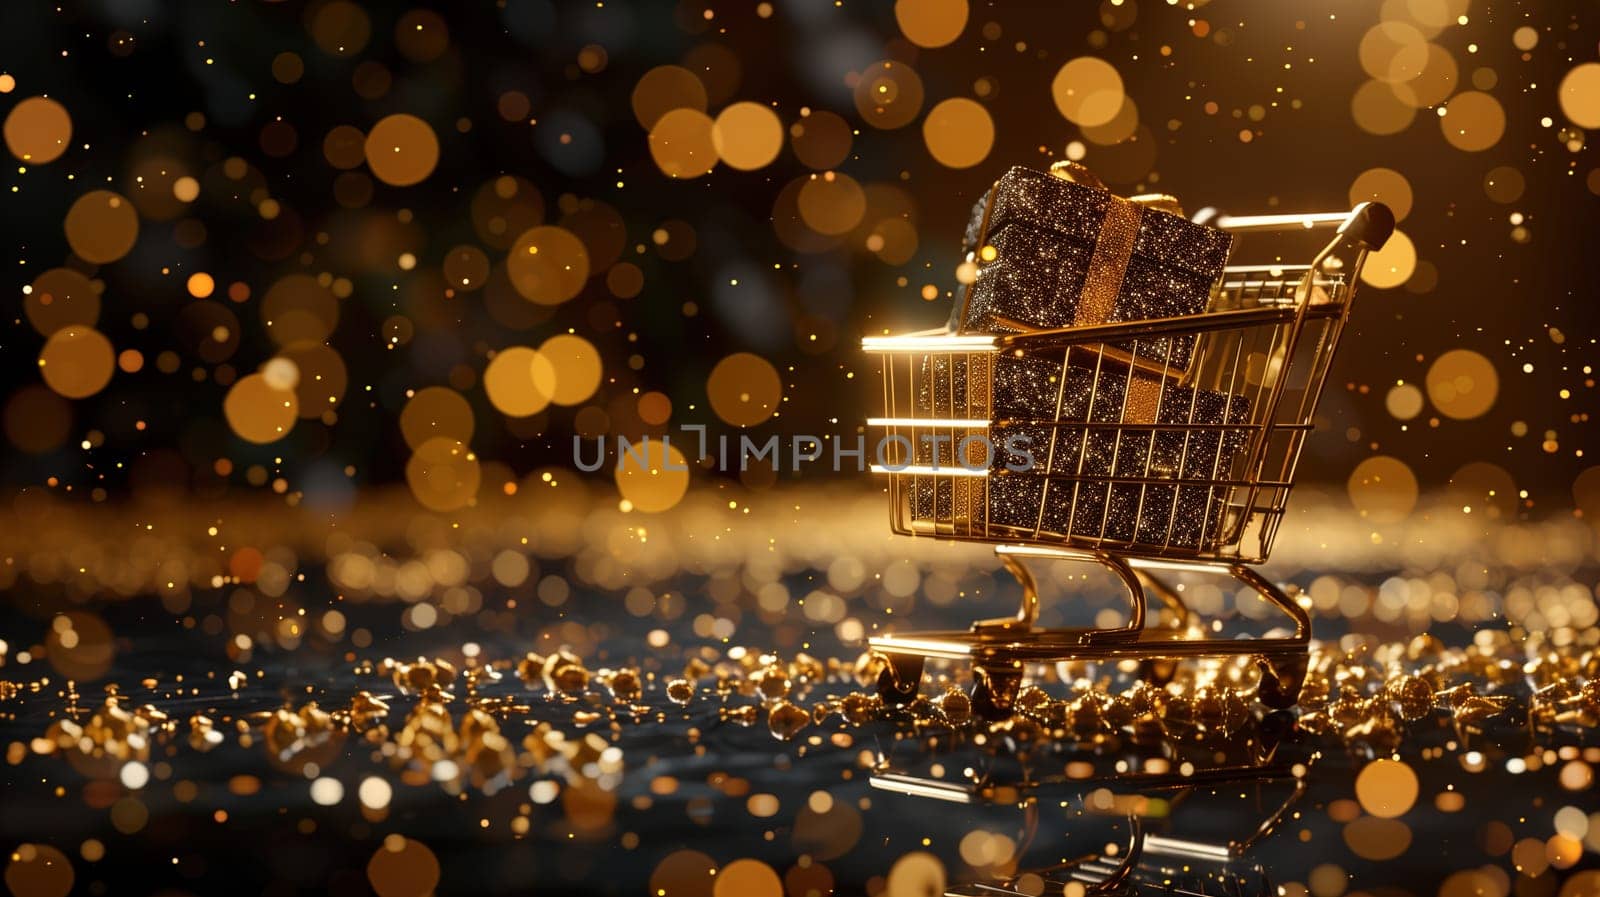 Shopping Cart Filled With Presents on Floor by TRMK